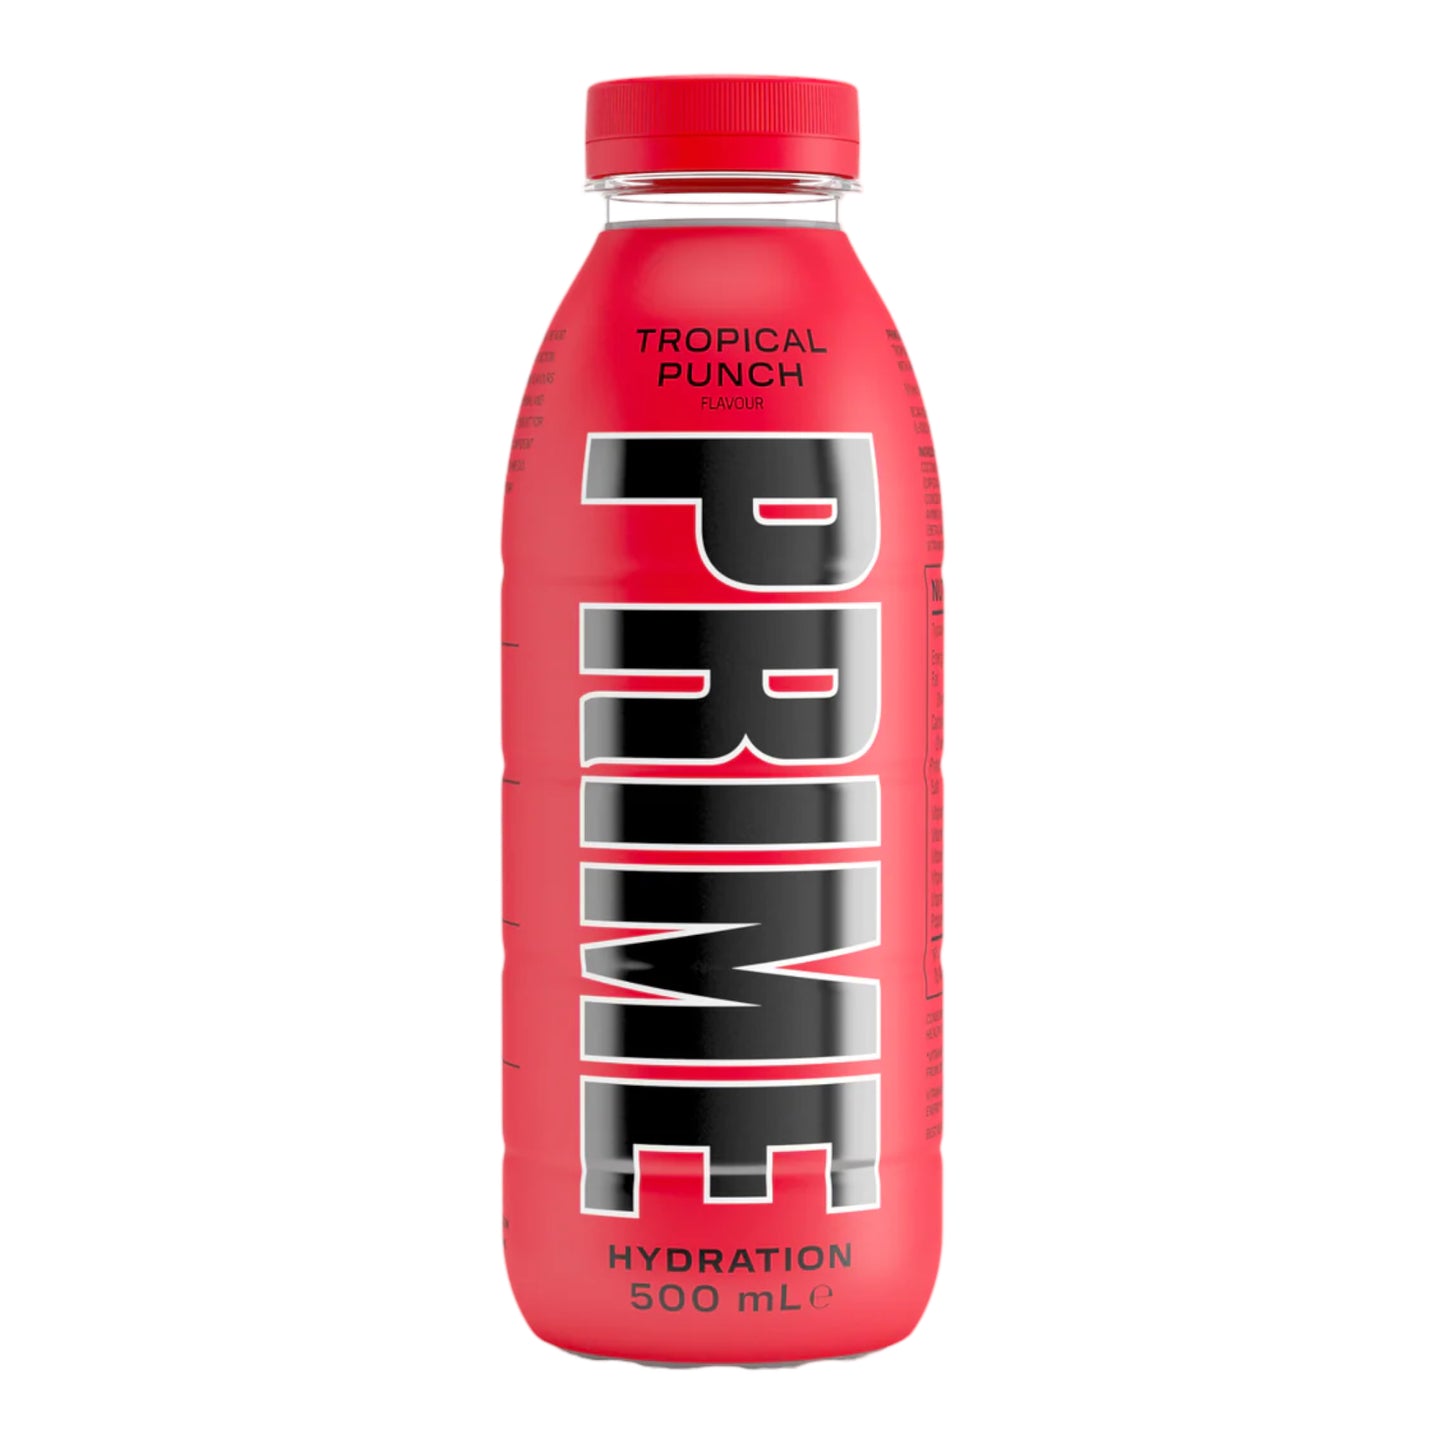 PRIME Hydration Tropical Punch - 500ml (UK VERSION)